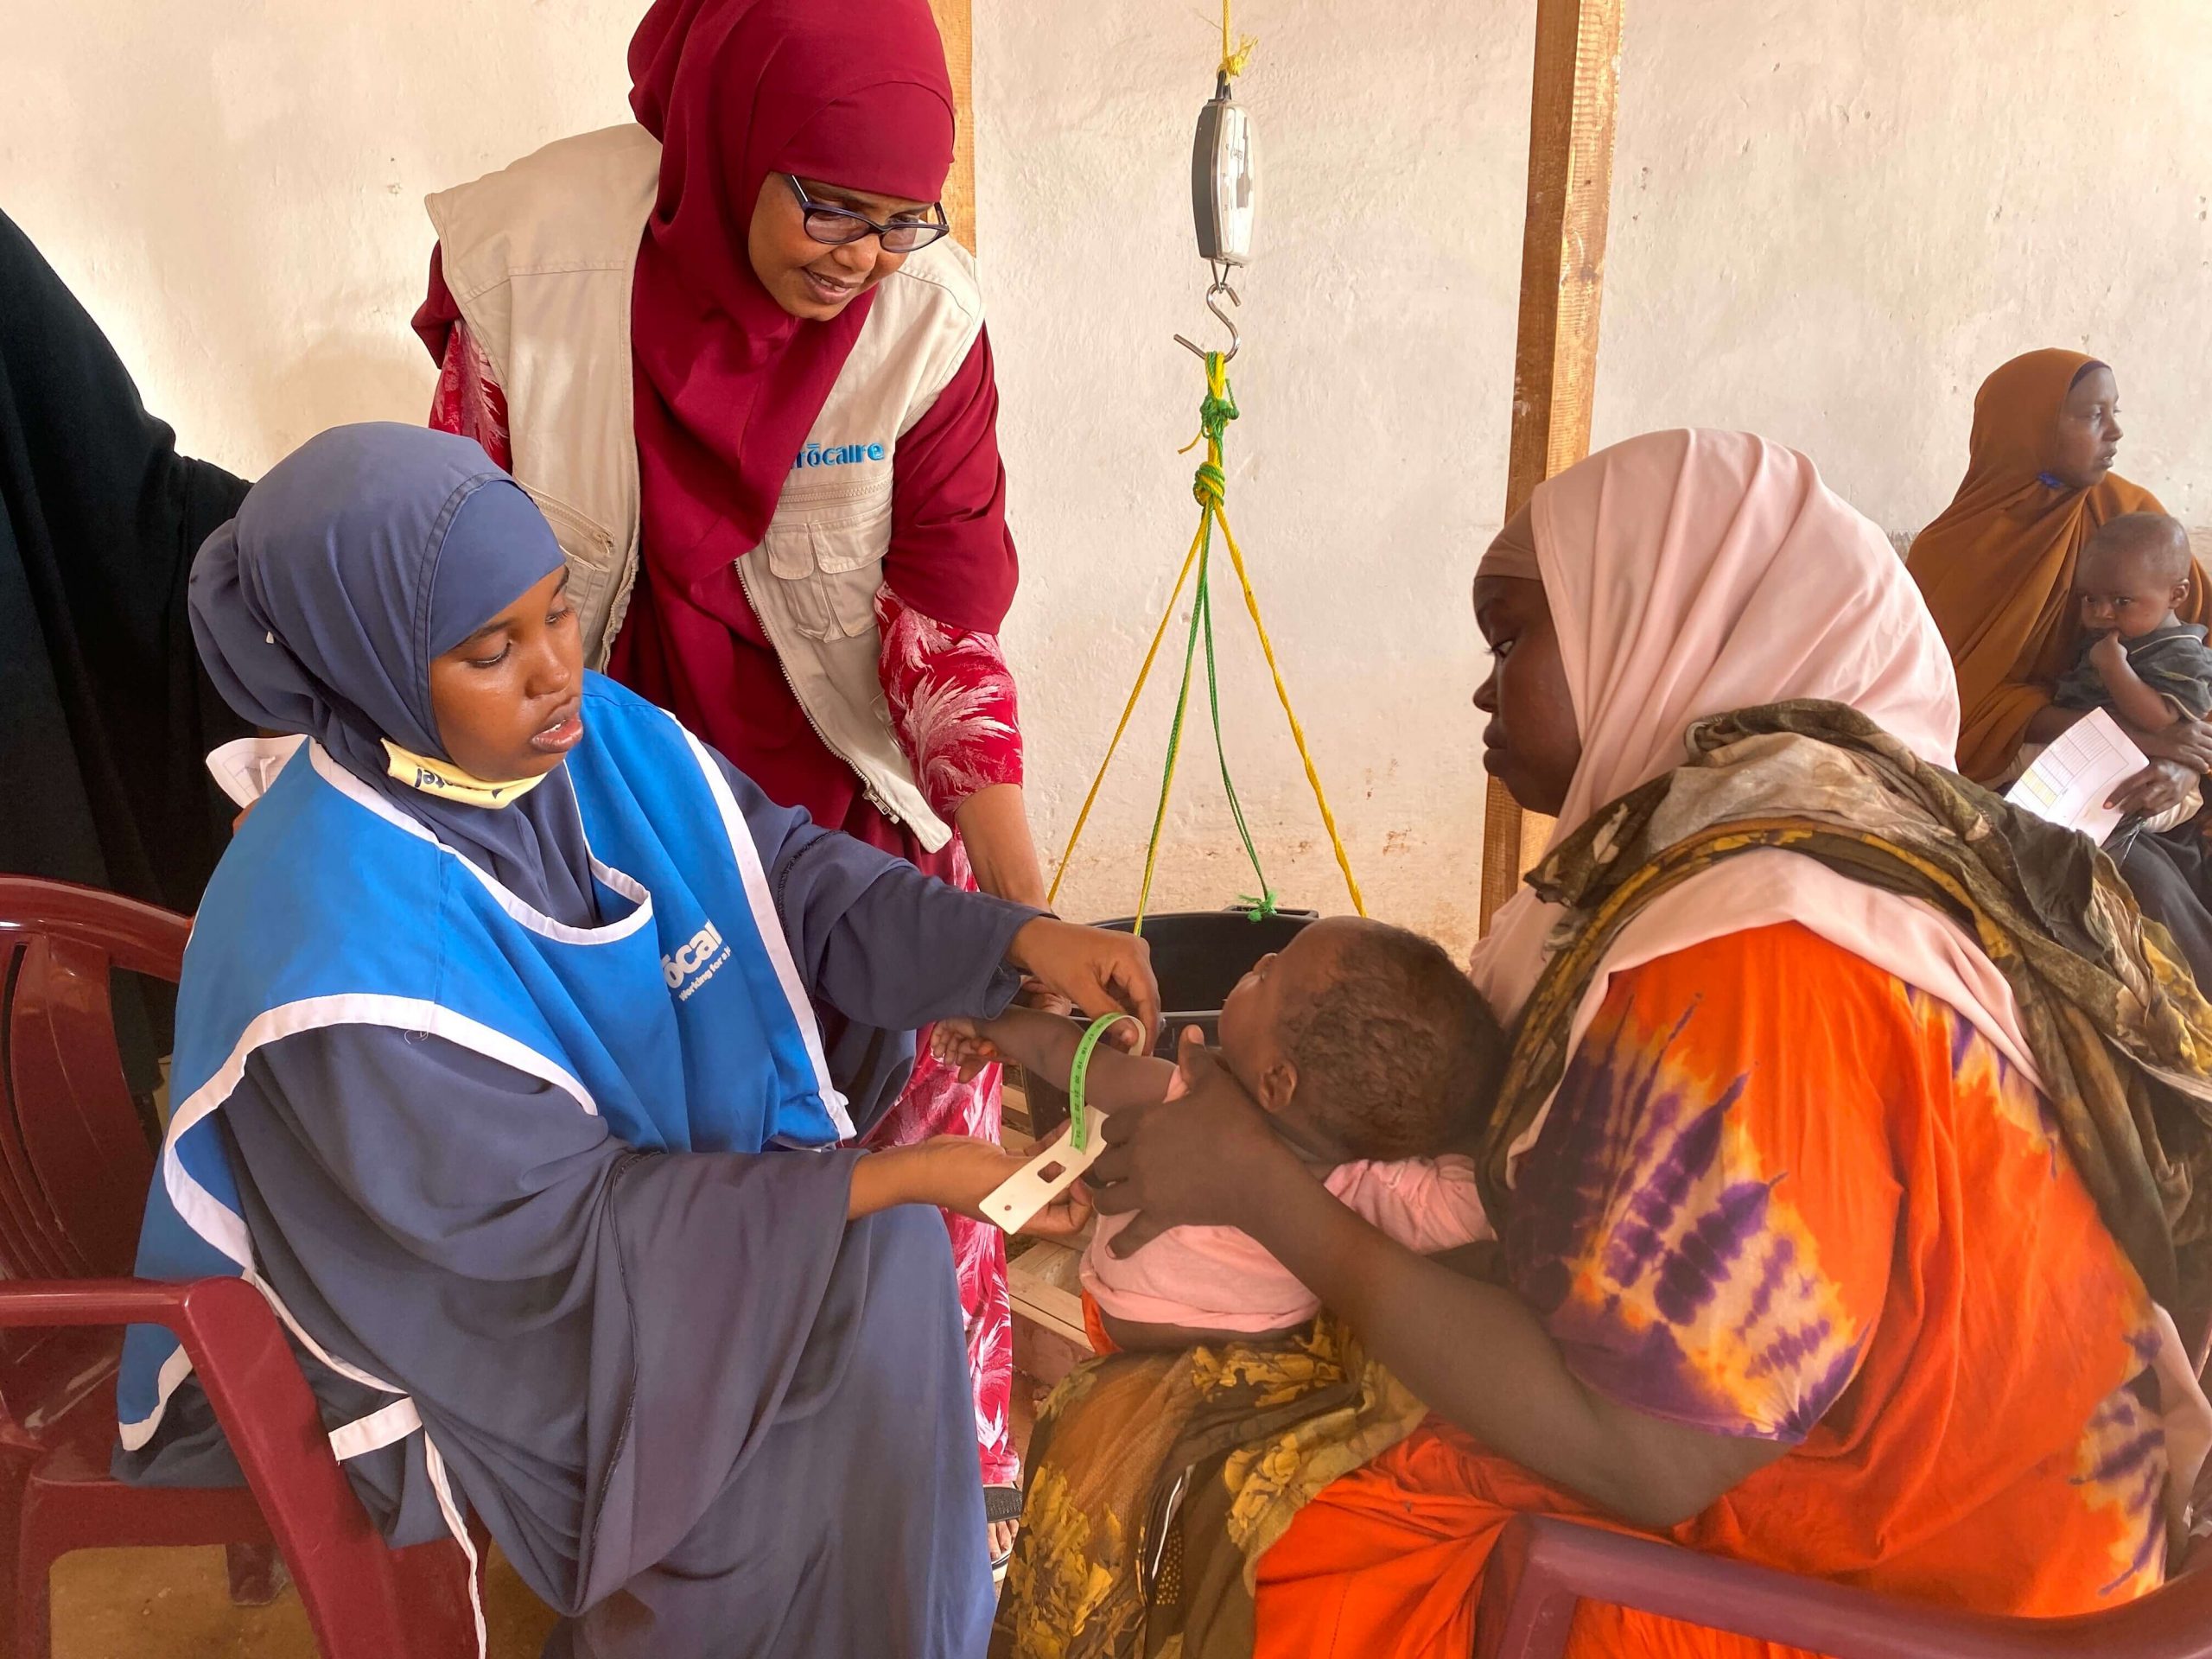 Mother Naima Abdi (22) and her one-year-old baby boy Faizal Abdullahai being assessed at the Trócaire run Dollow health referral Centre in Gedo, southern Somalia, using a MUAC (Mid-Upper Arm Circumference) Tape, a colour coded tape which is used on children from 6 months to 5 years to measure malnourishment. The assessment is being overseen by Trocaire nursing coordinator Habiba Ali Maalim and Community Nutrition Worker Ridwan Ali Faqid. Photo: Miriam Donohoe